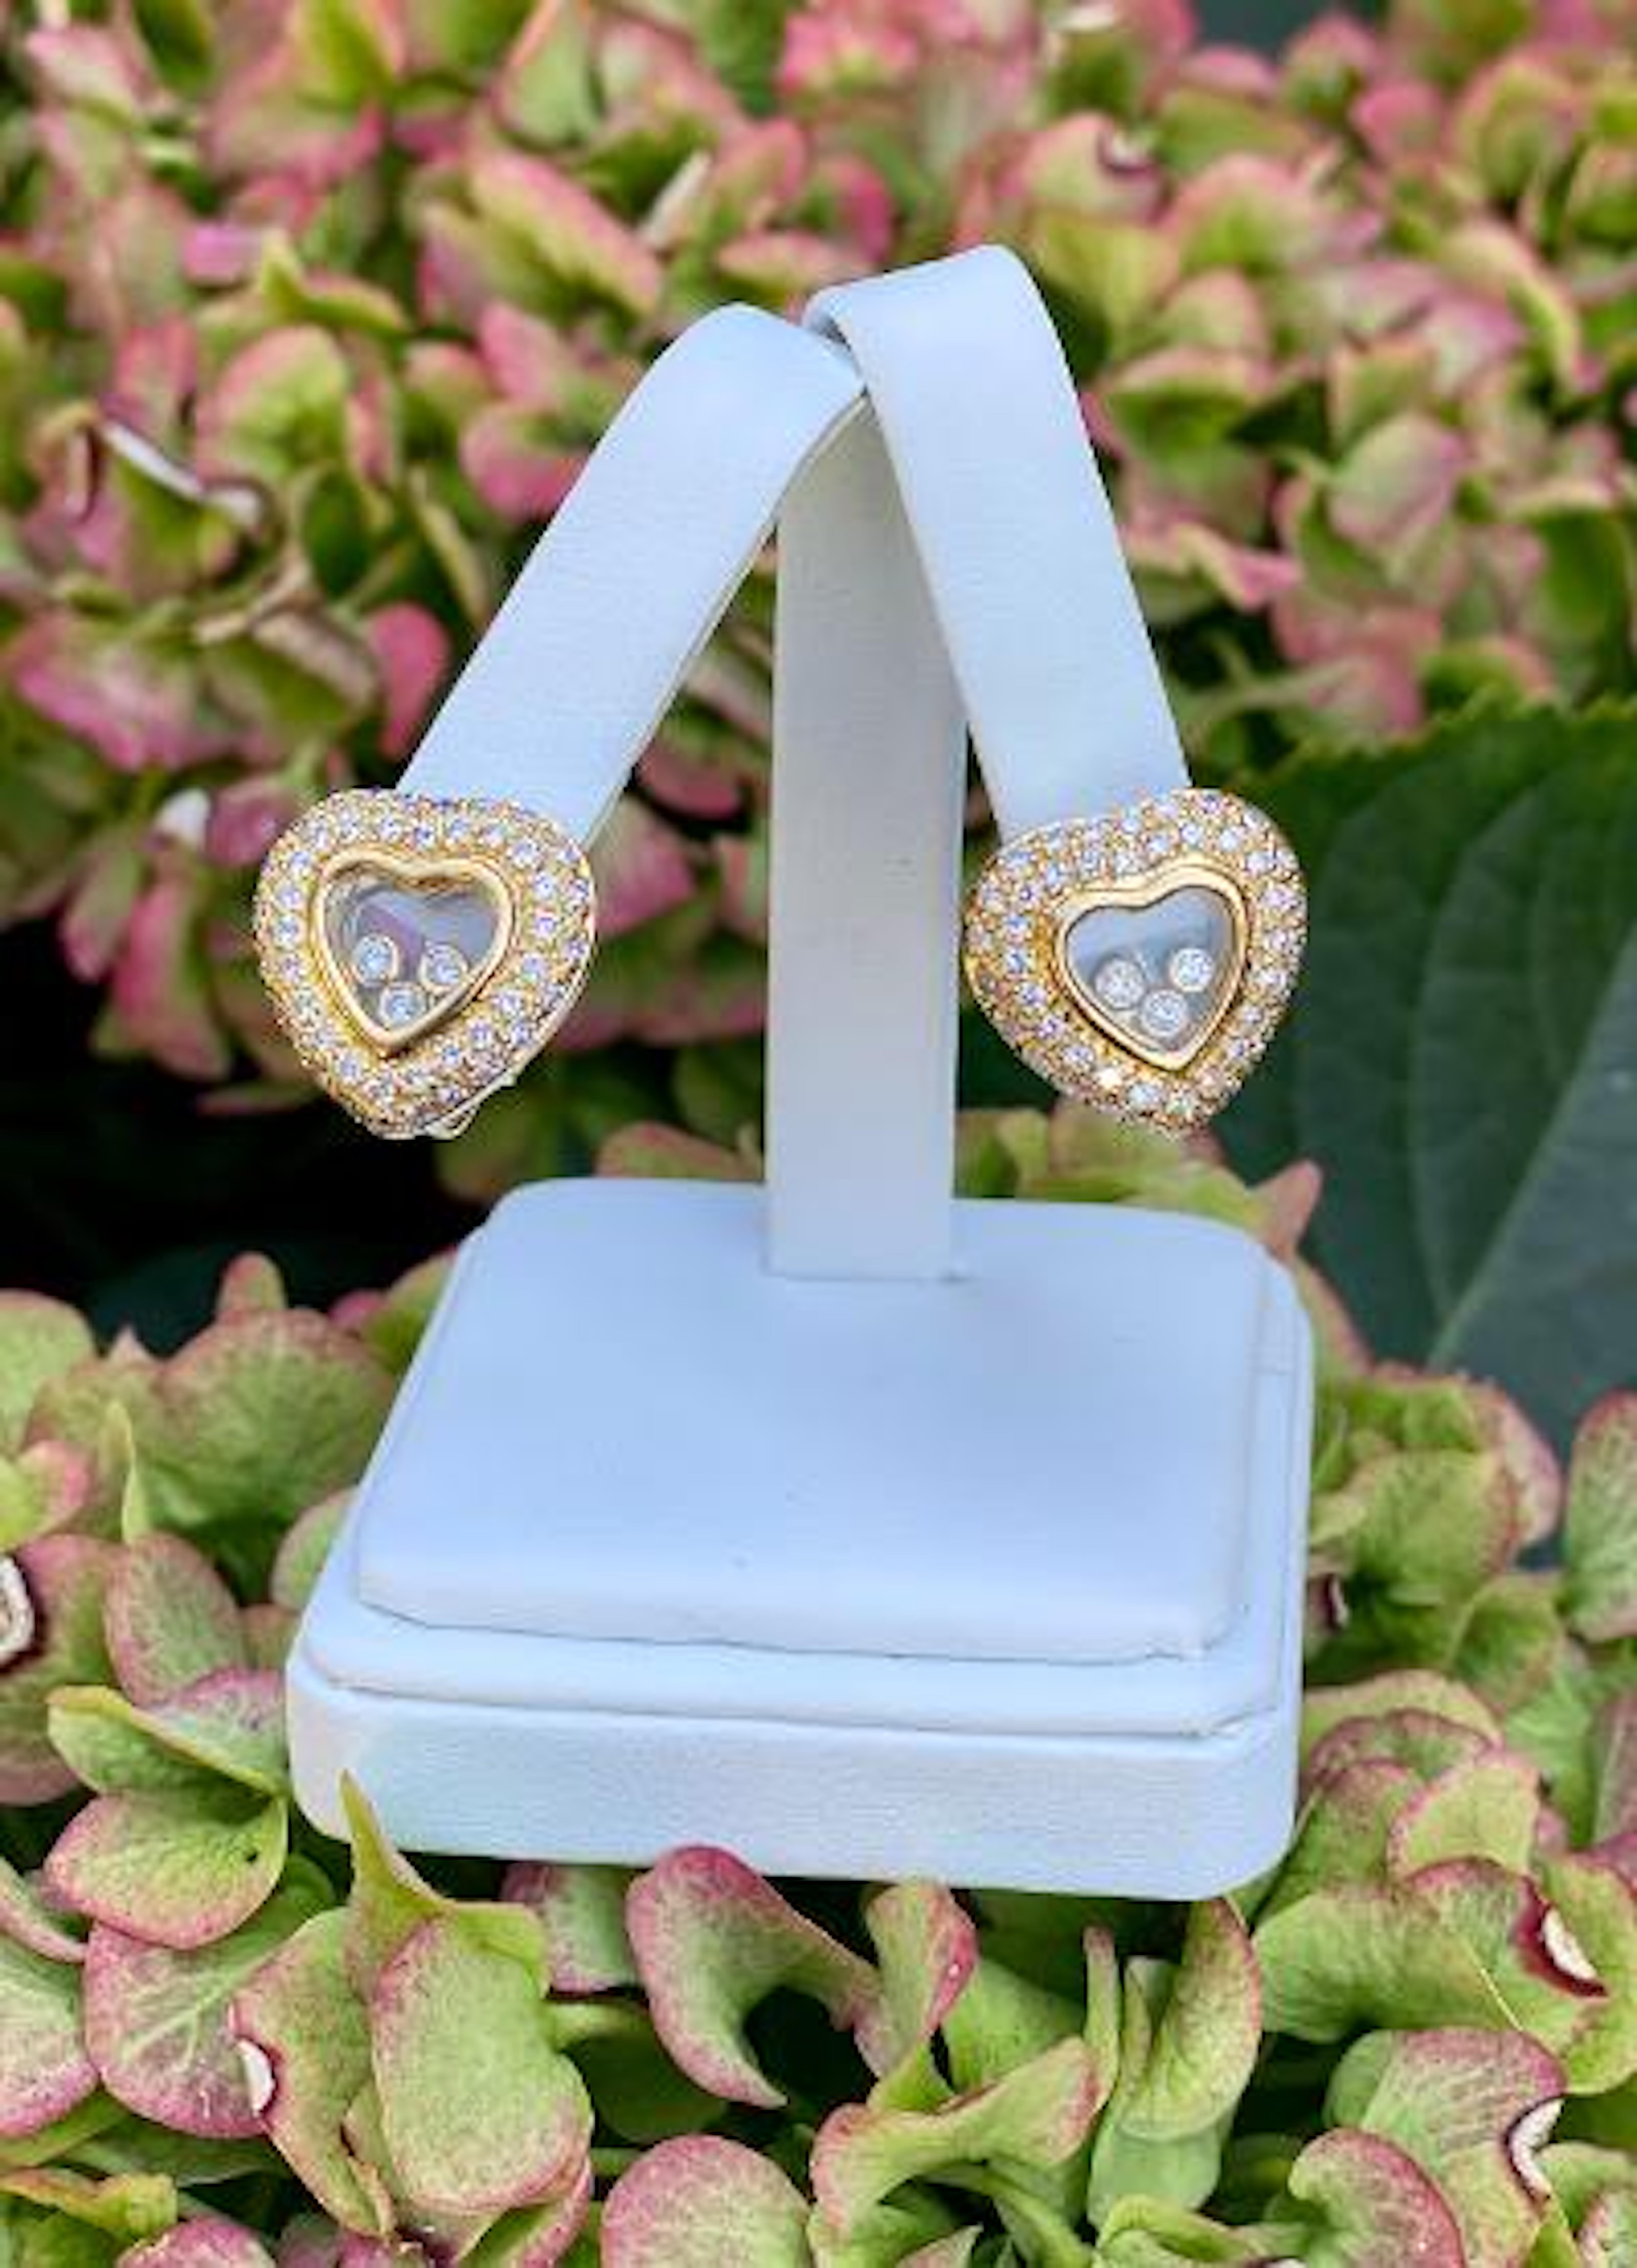 Beautiful hand made estate heart-shaped, 18 karat yellow gold pave diamond lever back earrings feature 6 bezel set round brilliant diamonds, encased in clear crystal, which float freely within the hearts. Surrounding each earring and the encased